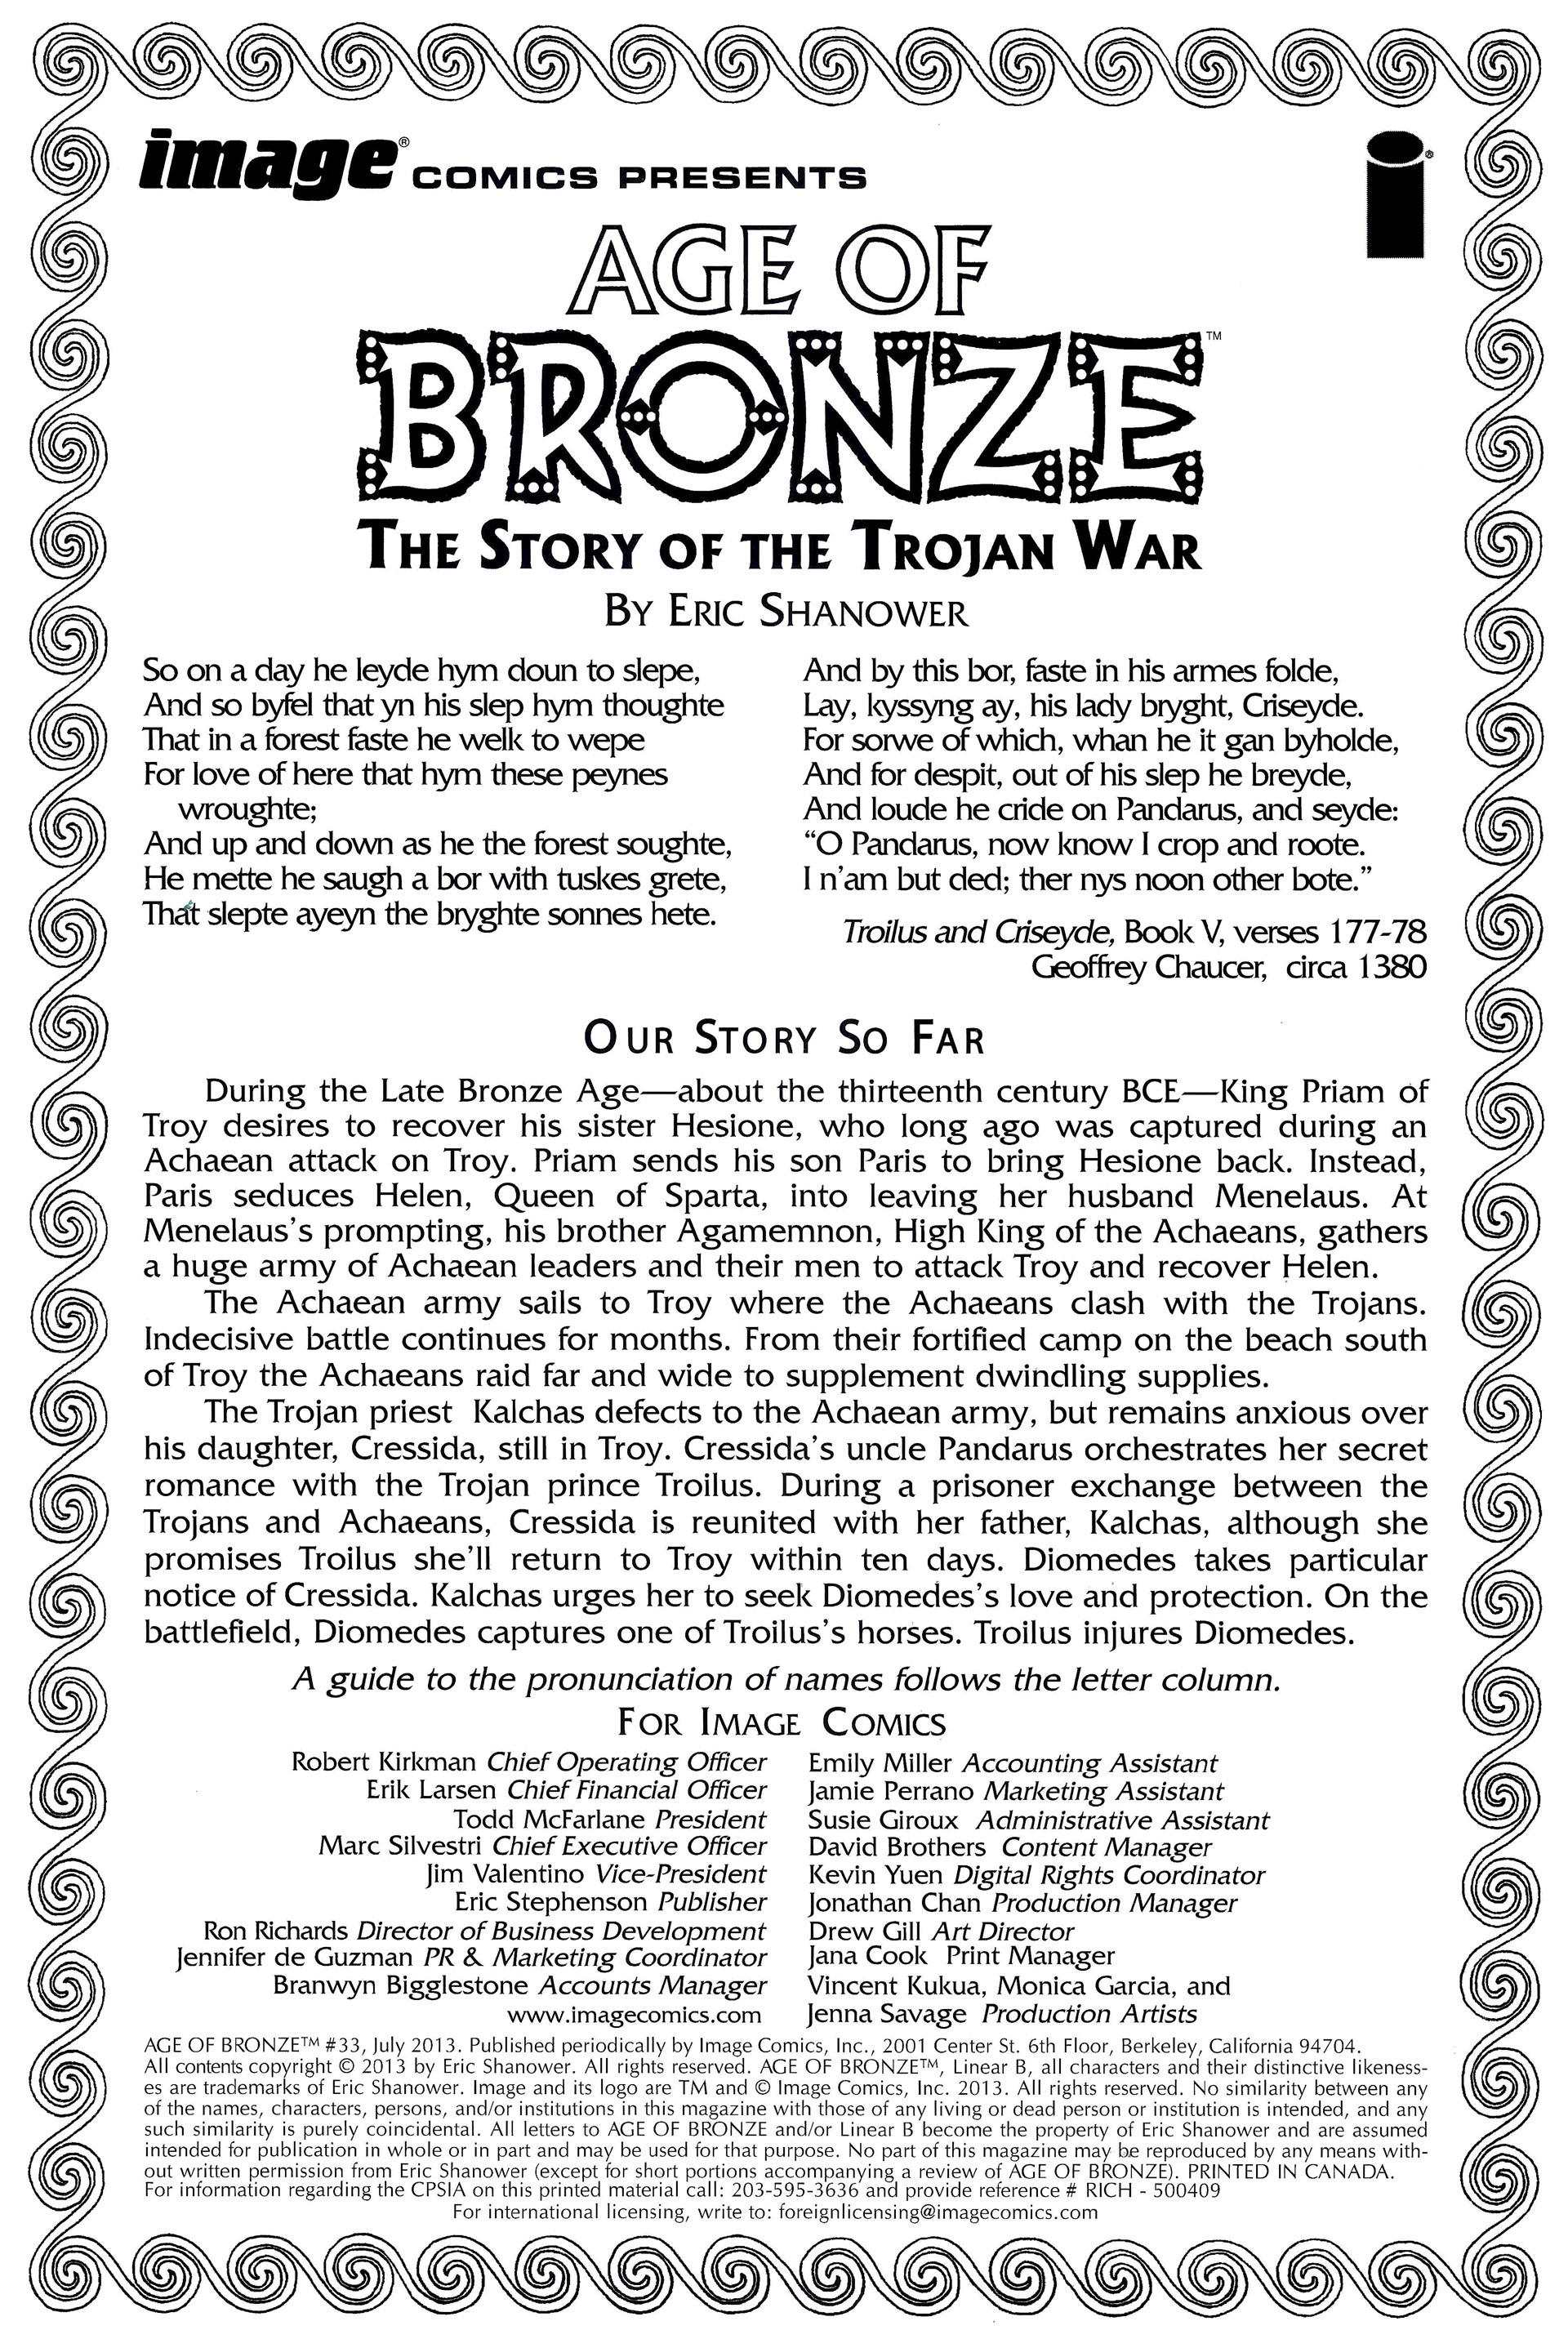 Read online Age of Bronze comic -  Issue #33 - 2